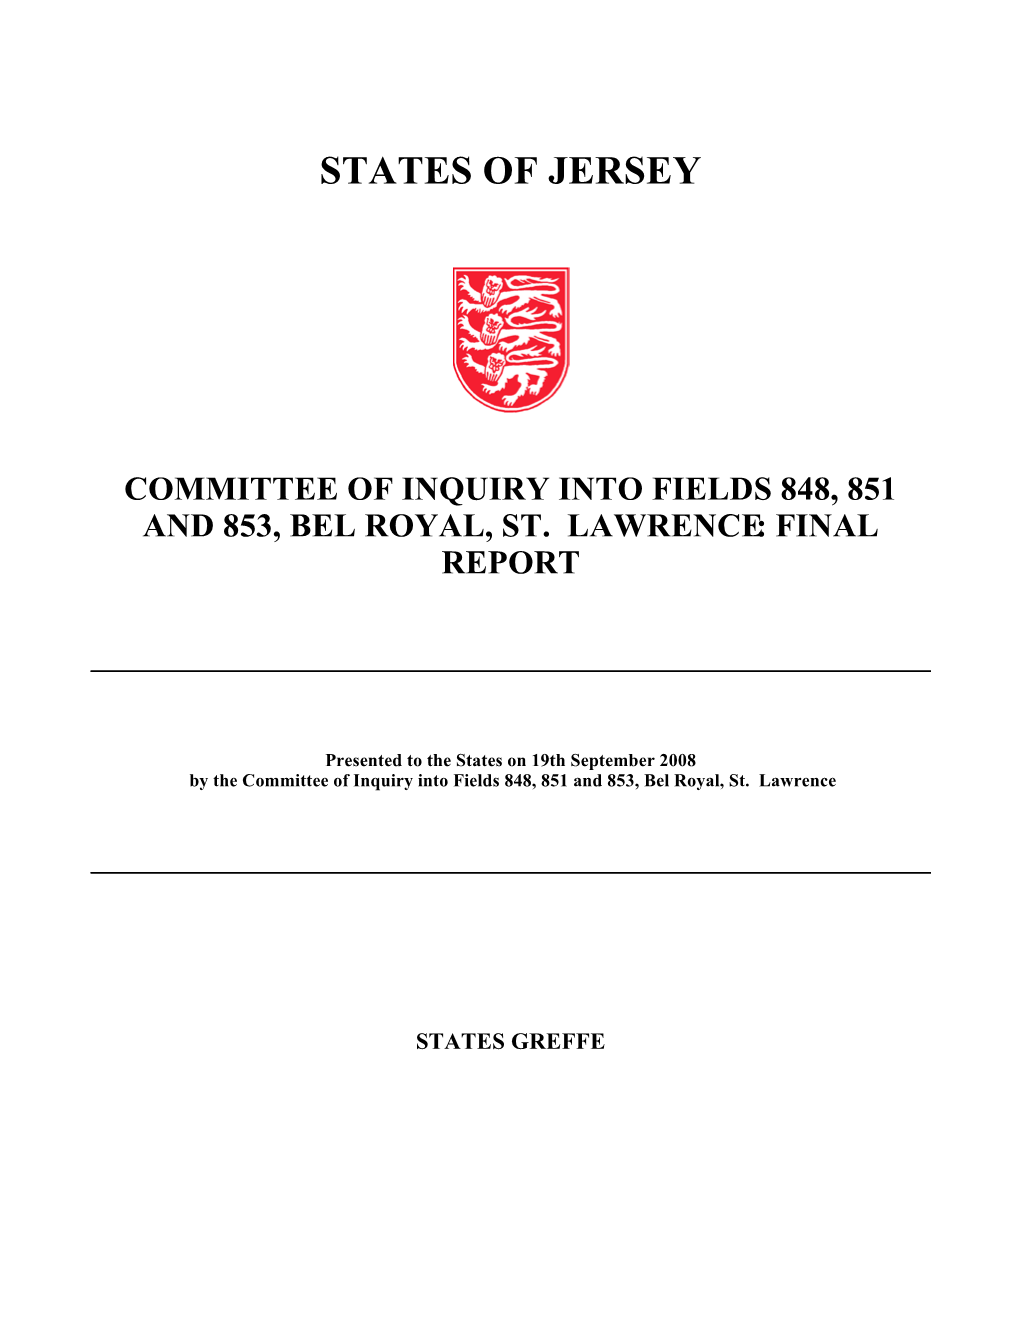 Committee of Inquiry Into Fields 848, 851 and 853, Bel Royal, St. Lawrence: Final Report